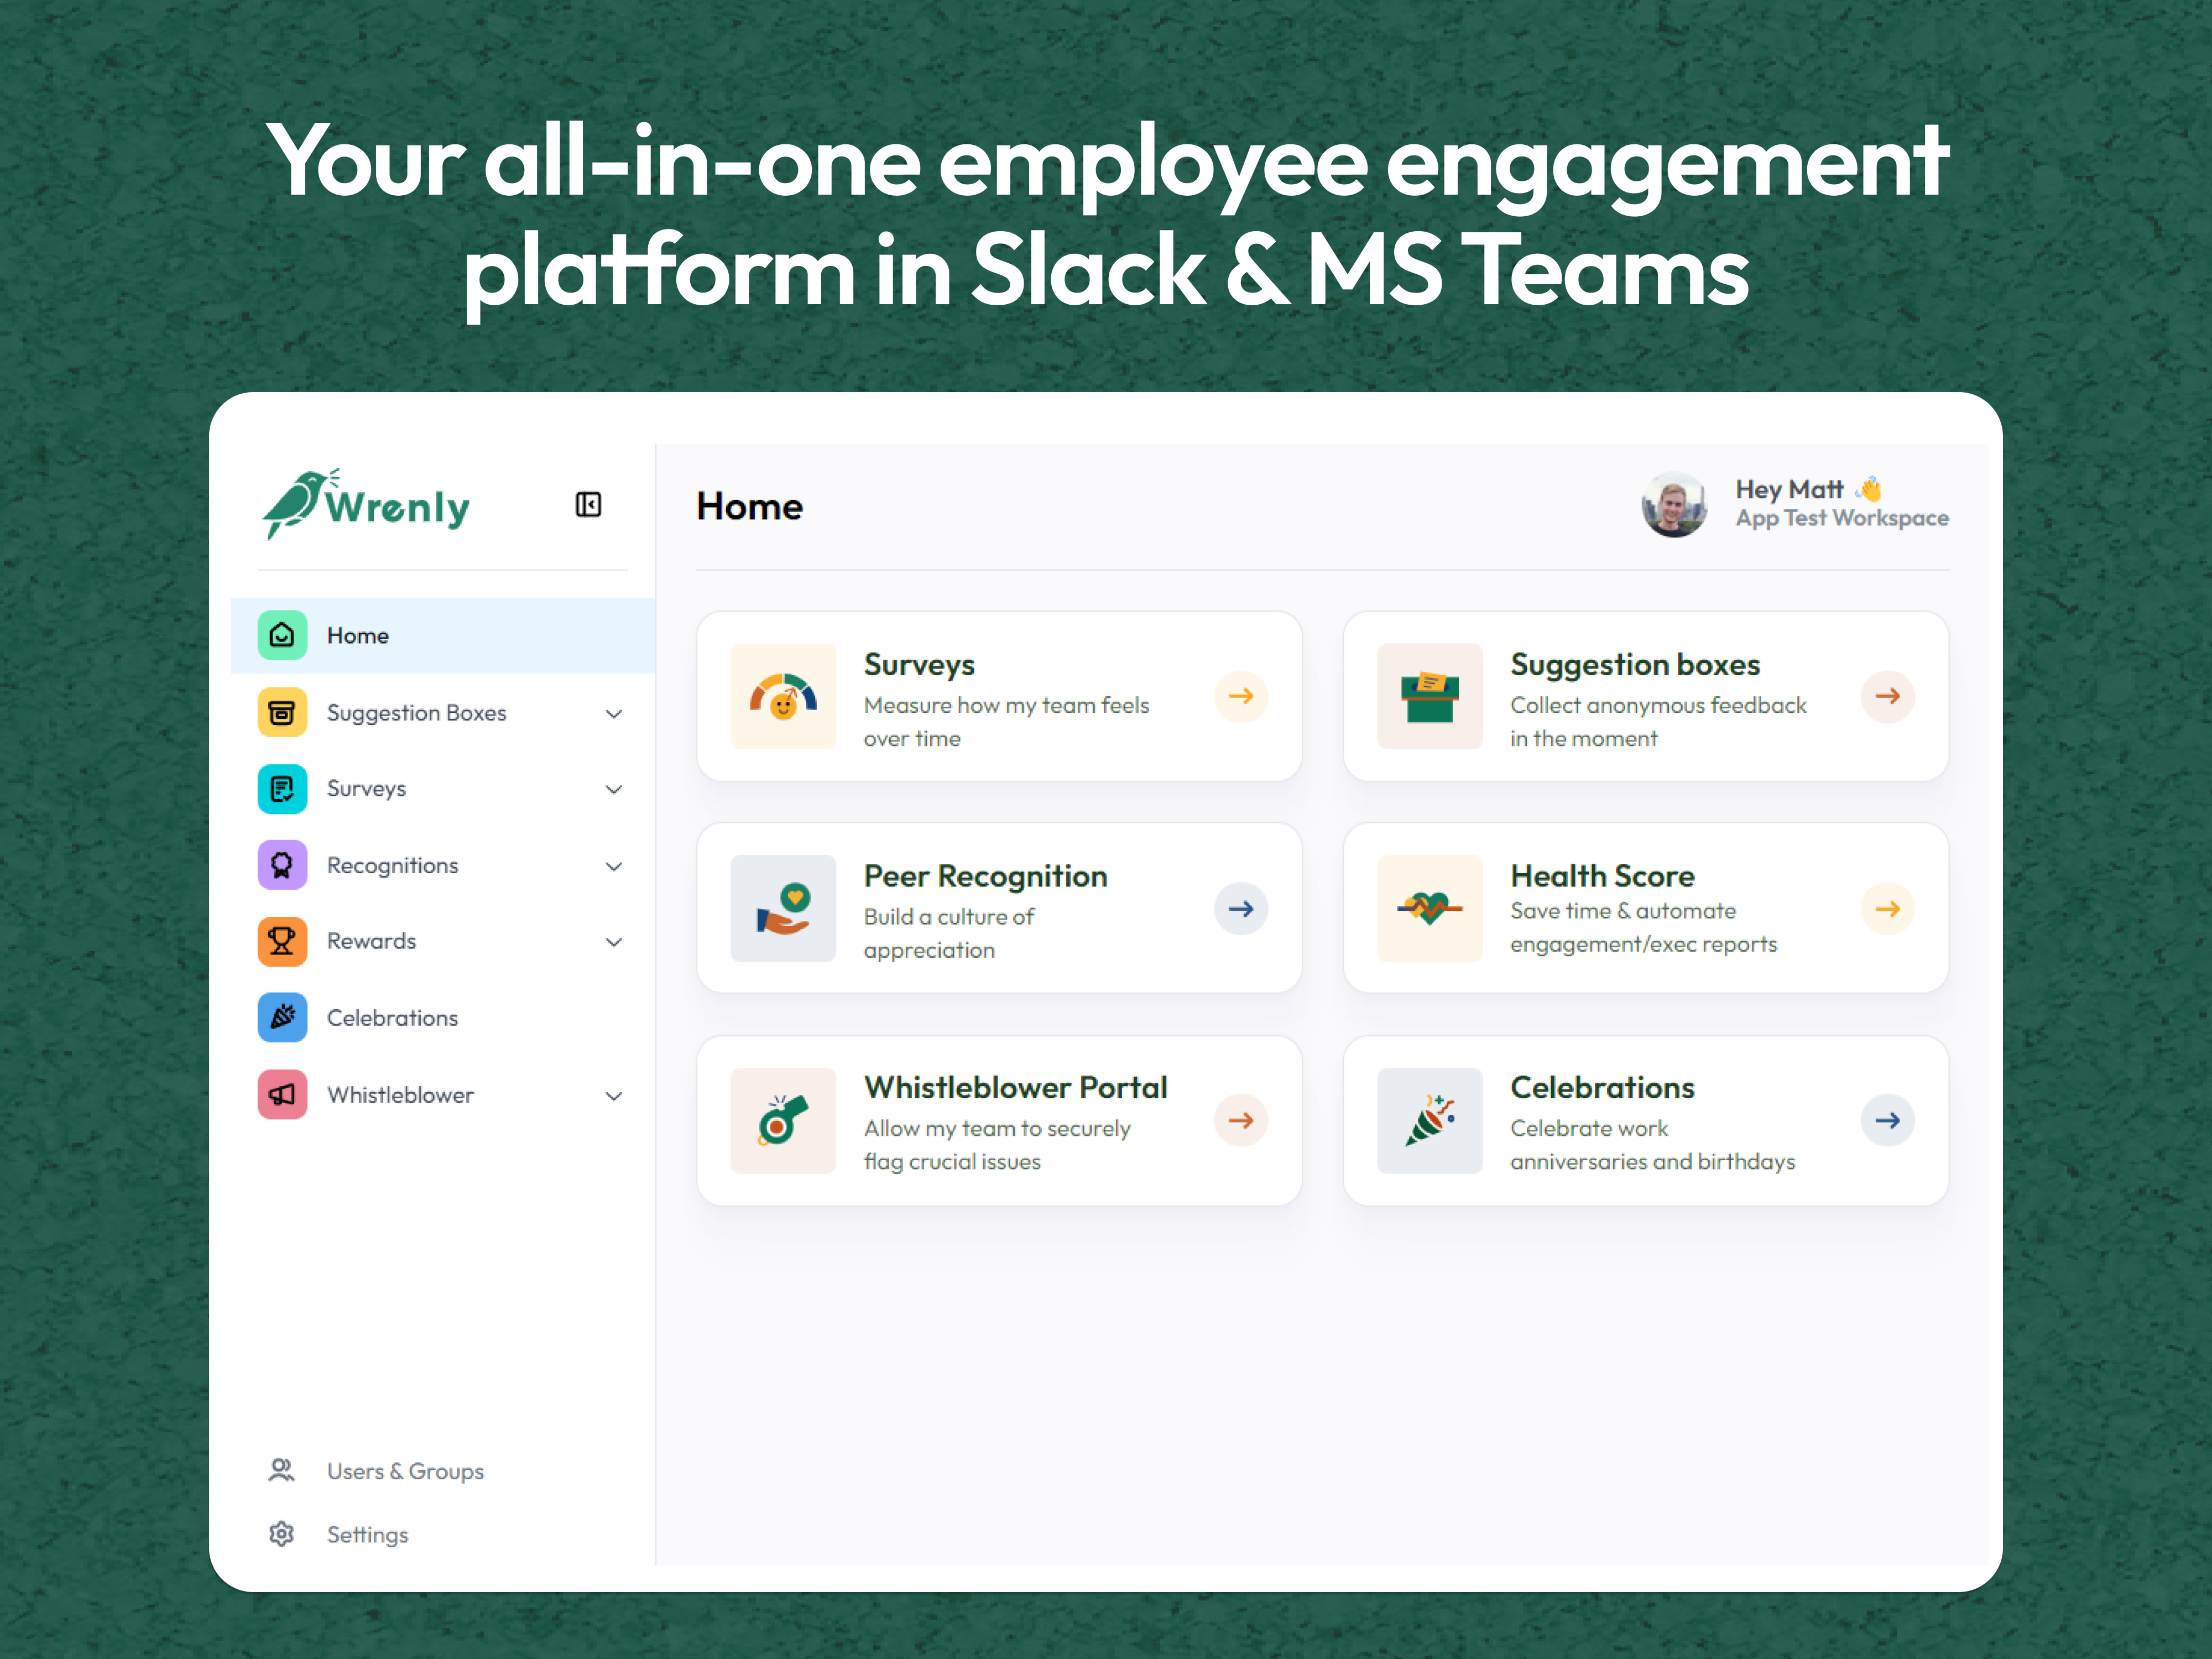 Your all-in-one employee engagement platform in Slack & MS Teams